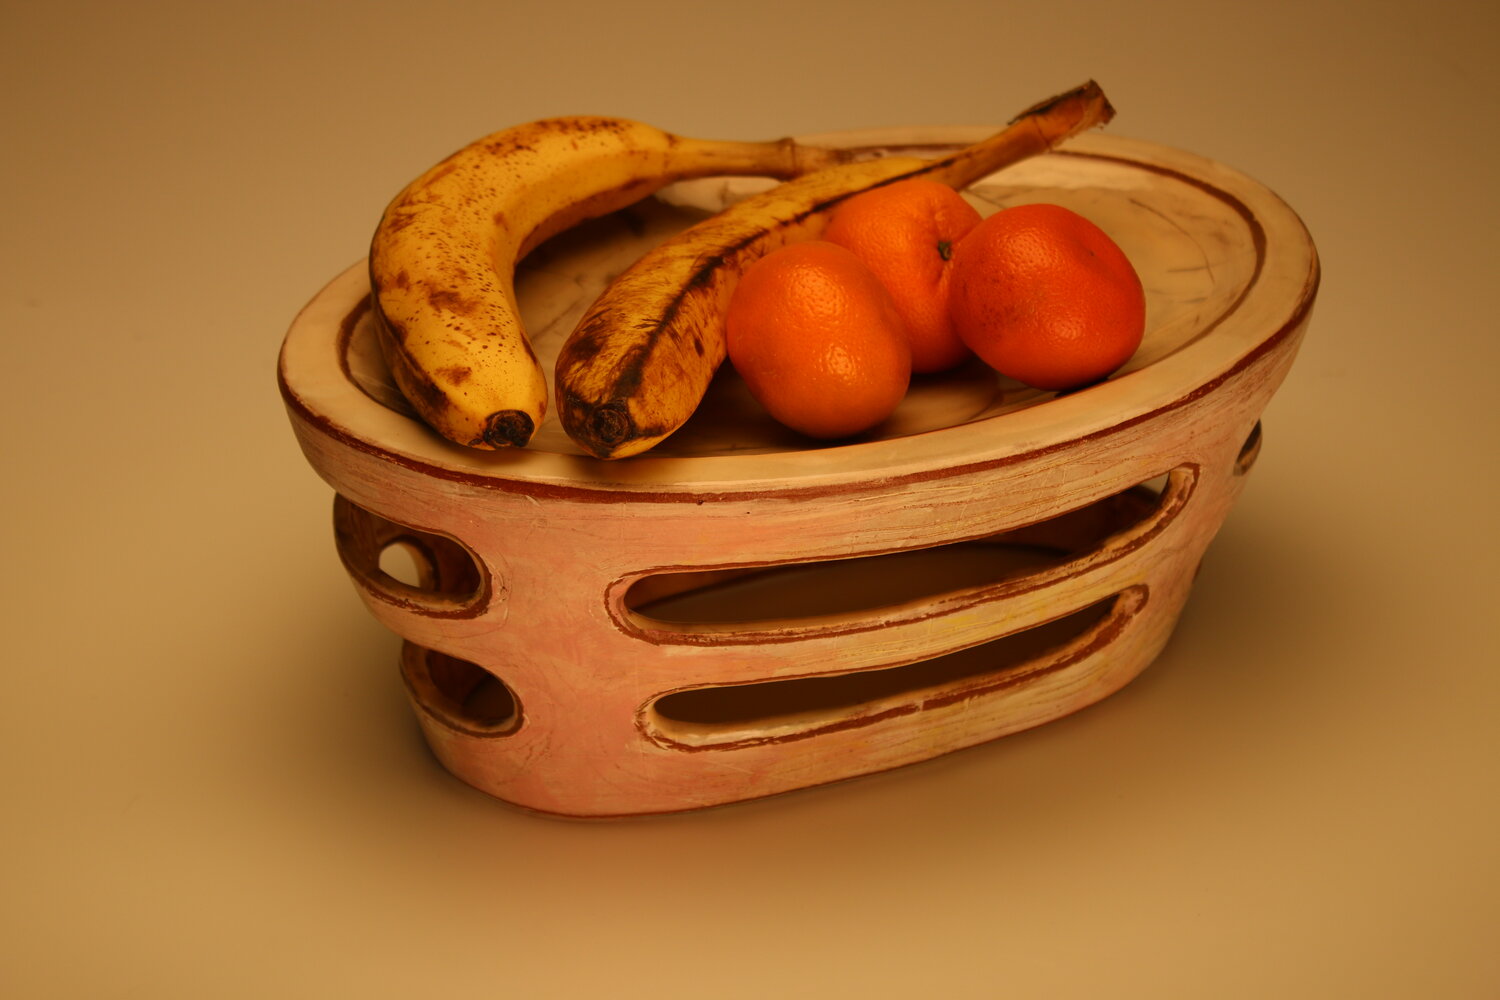 fruit on top of the reversible oval dish with oblong perforations, image courtesy of the artist